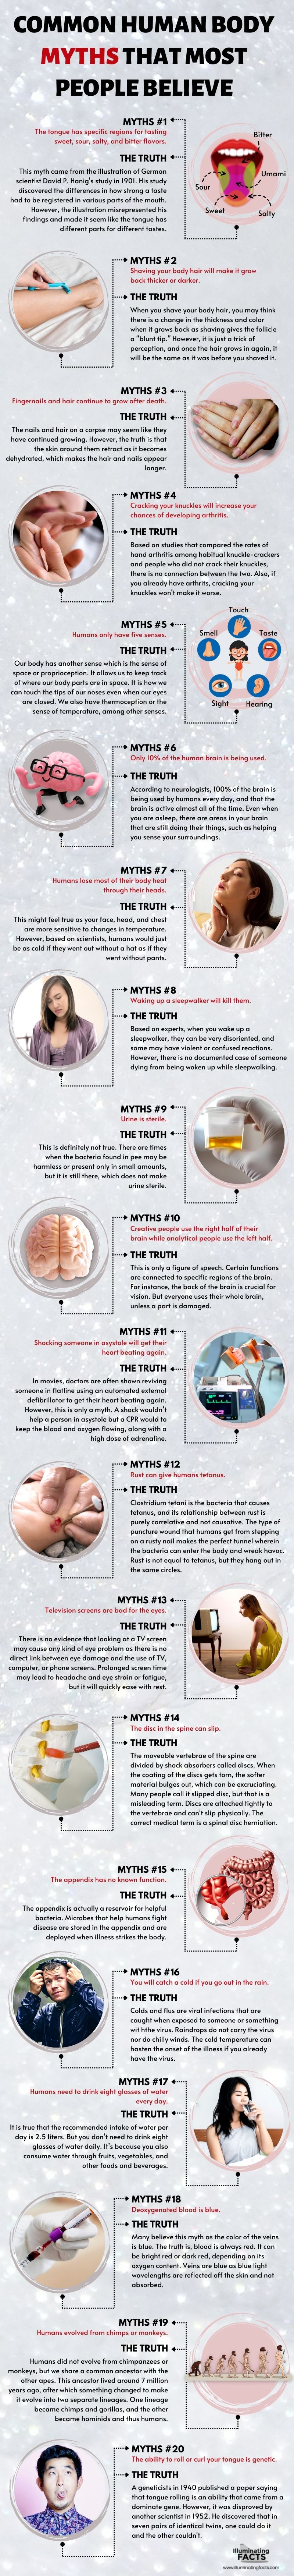 Common Human Body Myths Most People Believe - Illuminating Facts